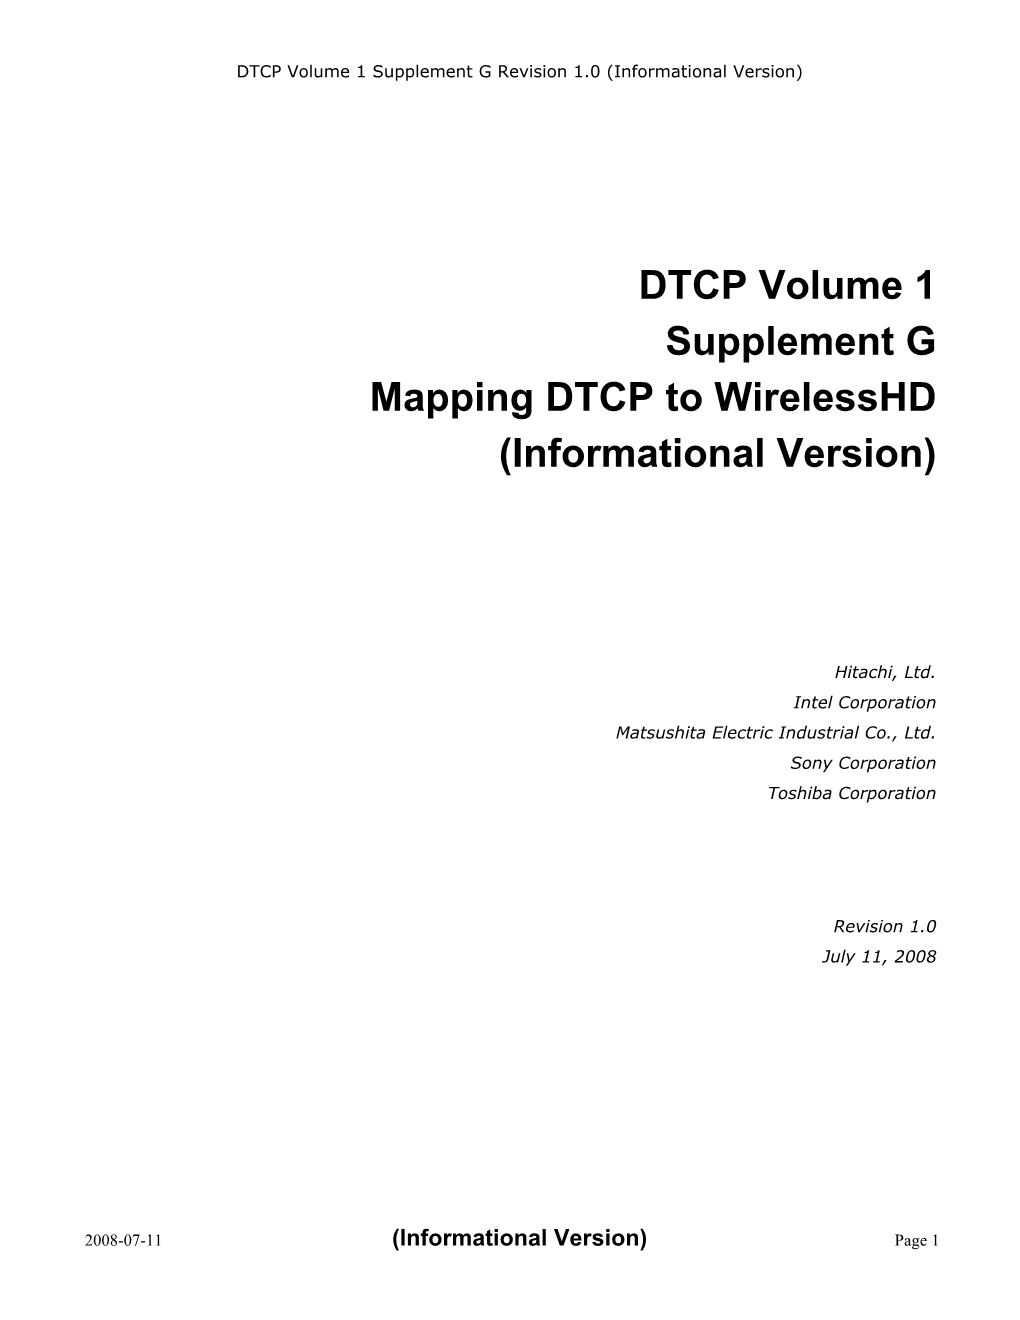 DTCP Volume 1 Supplement G Mapping DTCP to Wirelesshd (Informational Version)